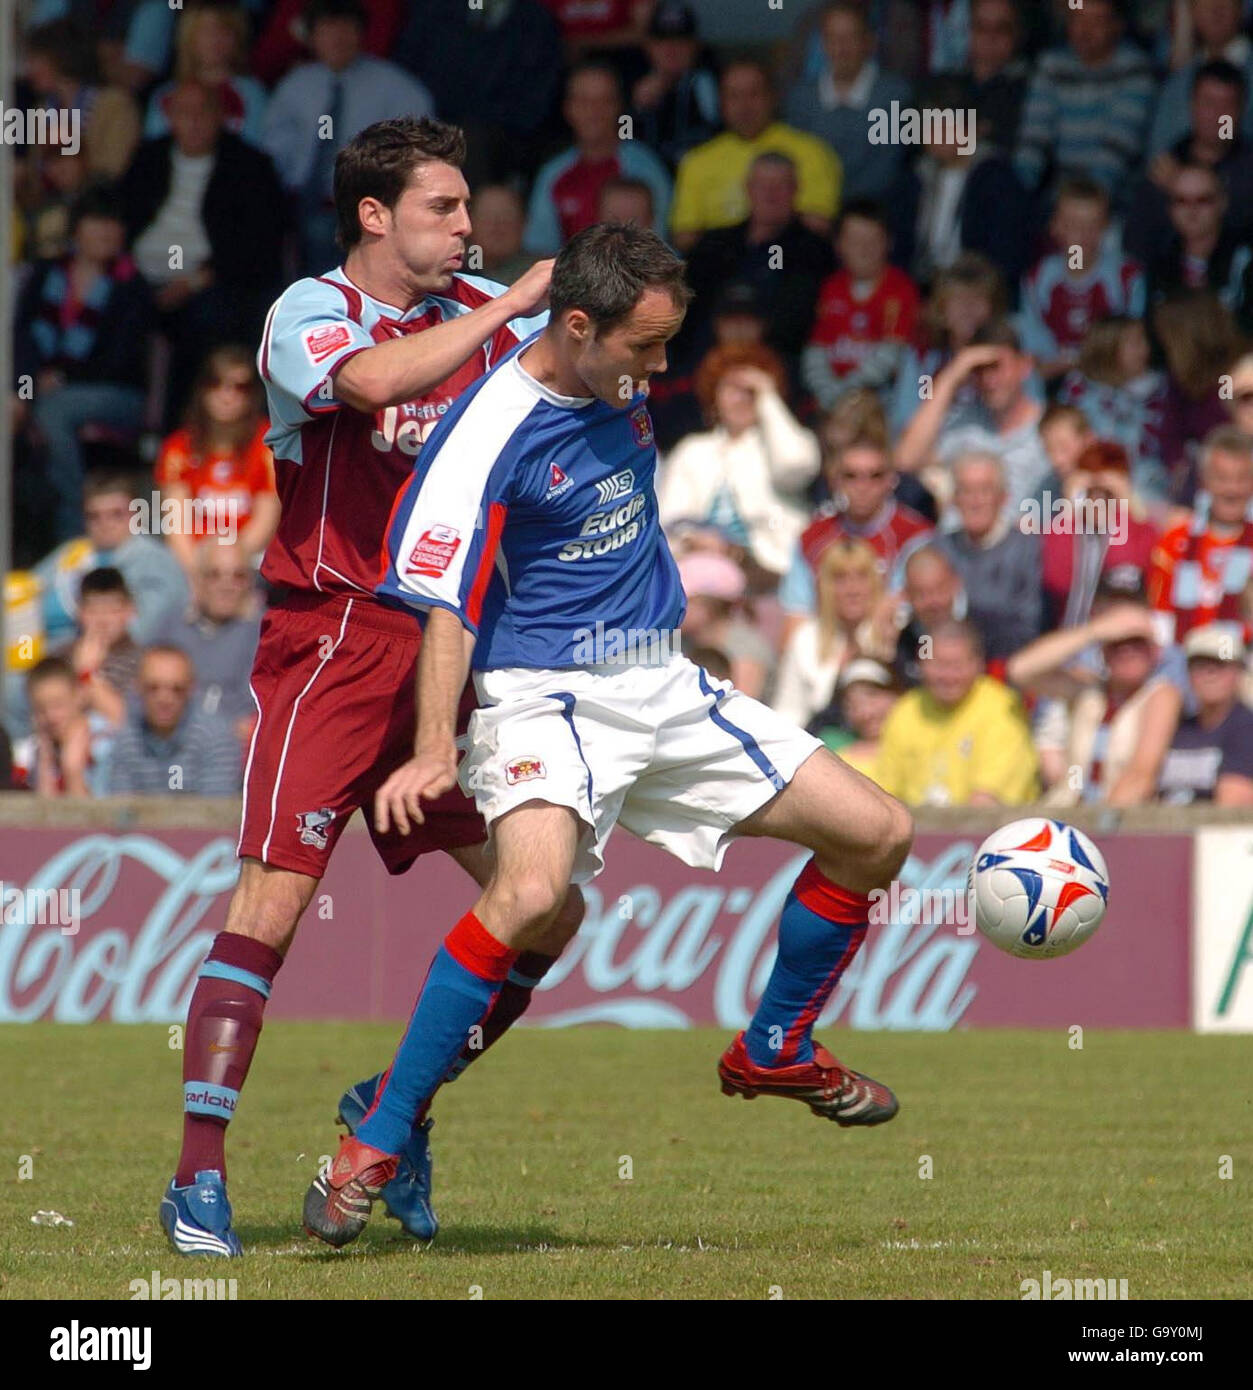 Scunthorpe's Matt Sparrow (left) challenges Carlisle's David Raven during the Coca-Cola Football League One match at Glanford Park, Scunthorpe. Stock Photo